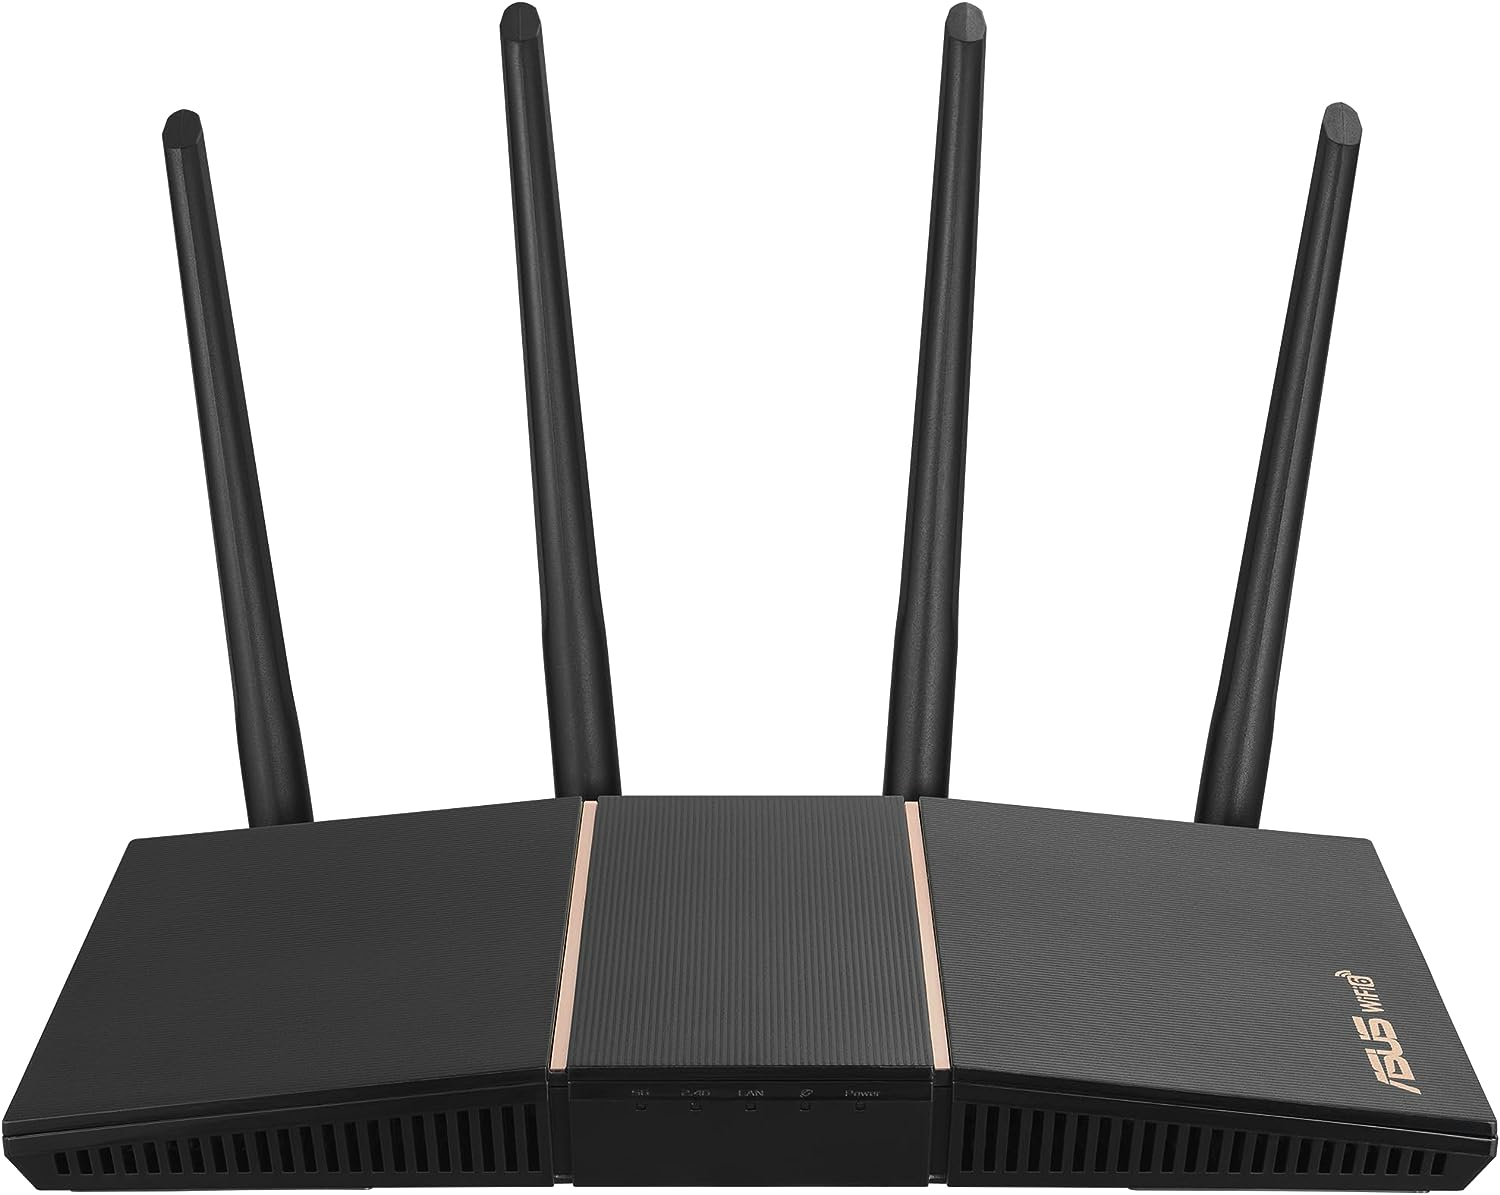 Is Now the Time to Replace Your WiFi 6 Router?